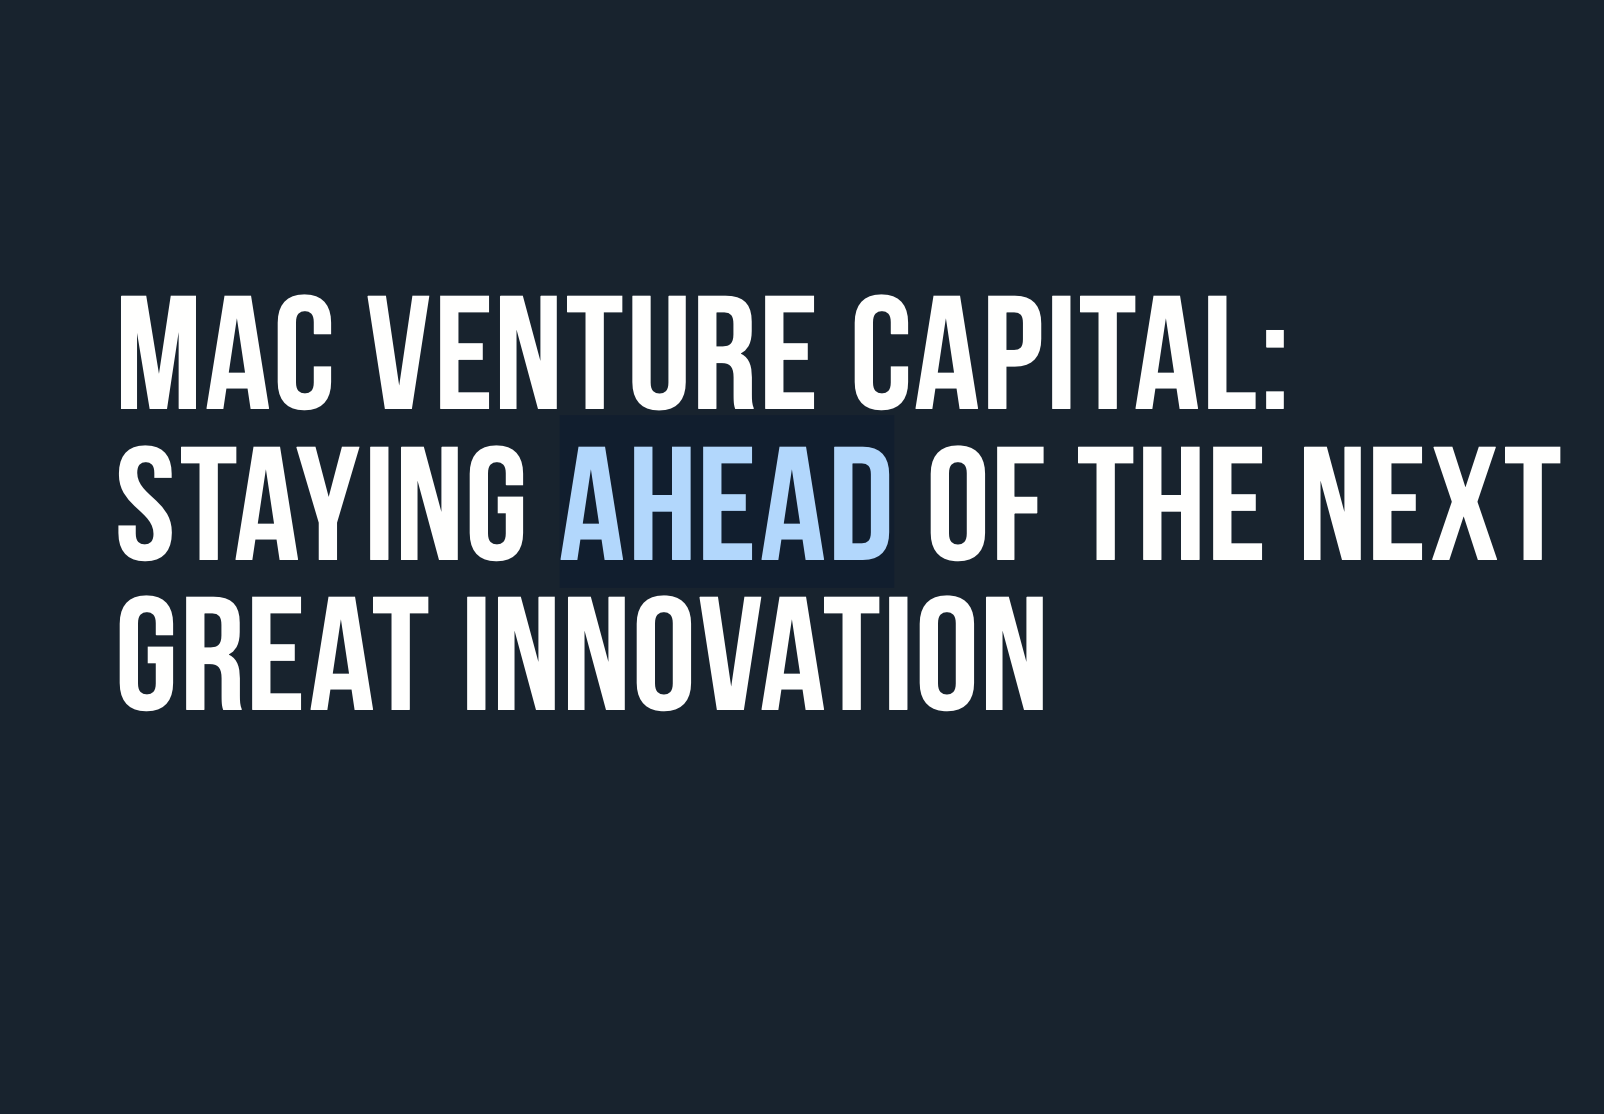 MAC VENTURE CAPITAL: STAYING AHEAD OF THE NEXT GREAT INNOVATION